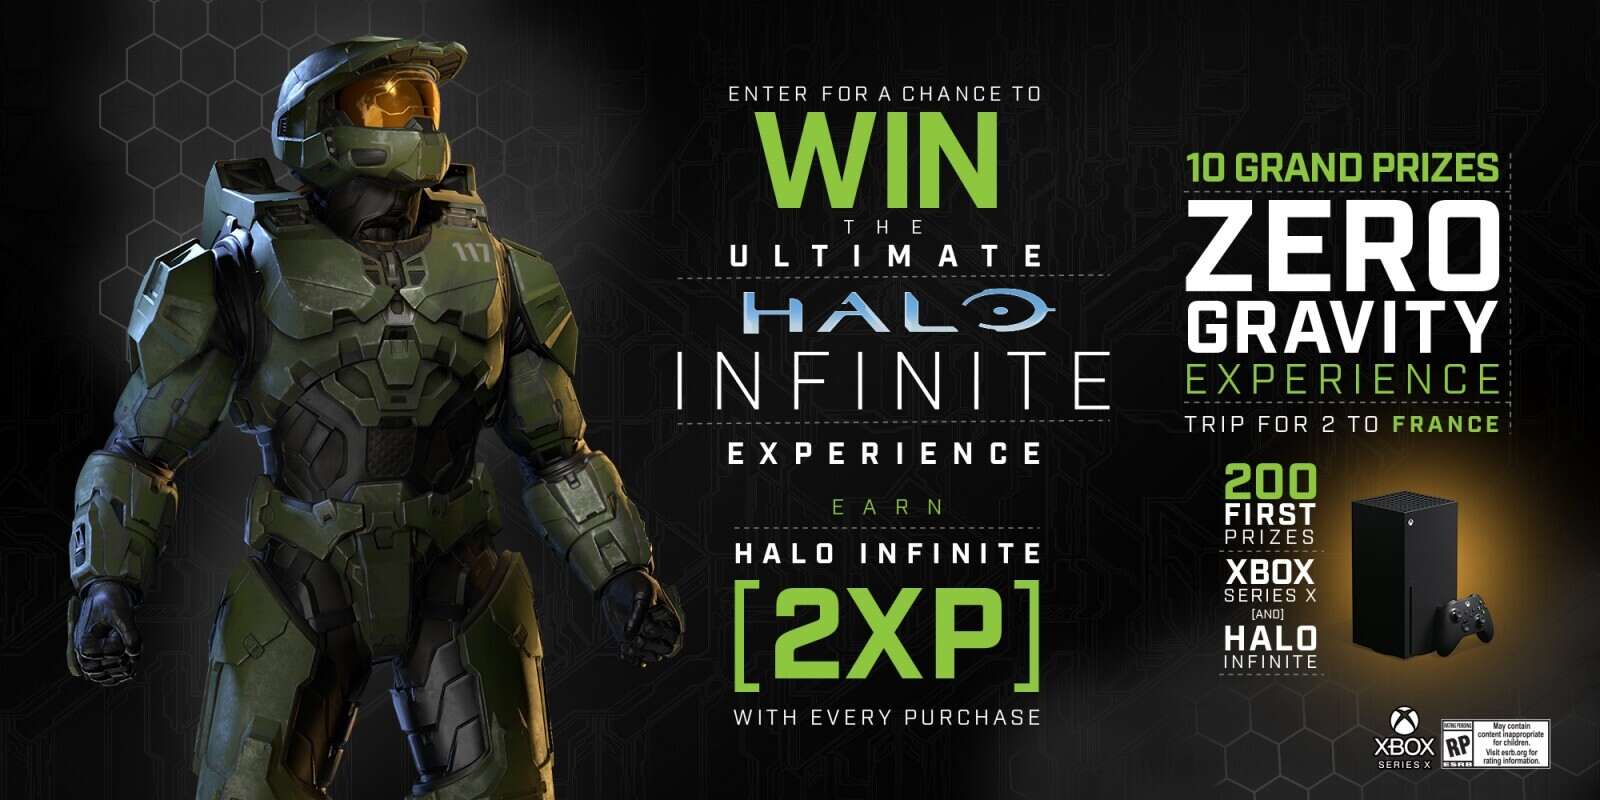 Halo Infinite & Monster Energy Promo | Win XP, an XBox, and More